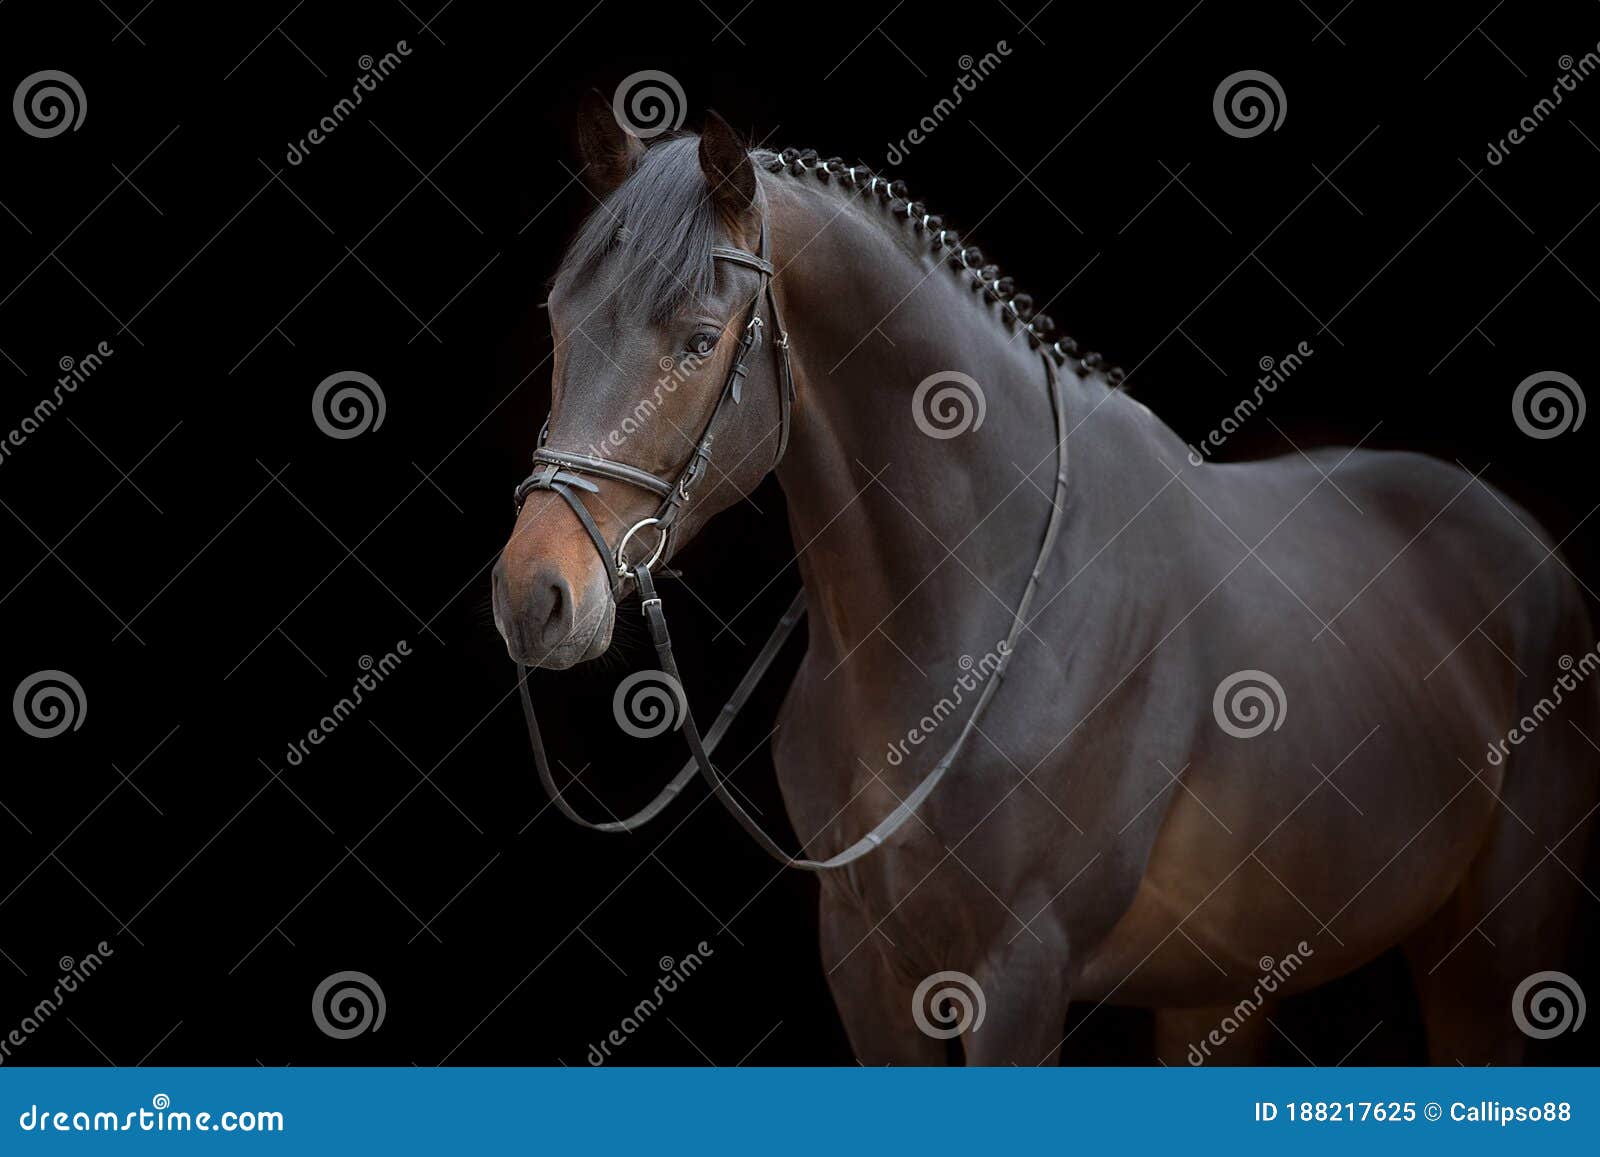 bay horse portrait in bridle